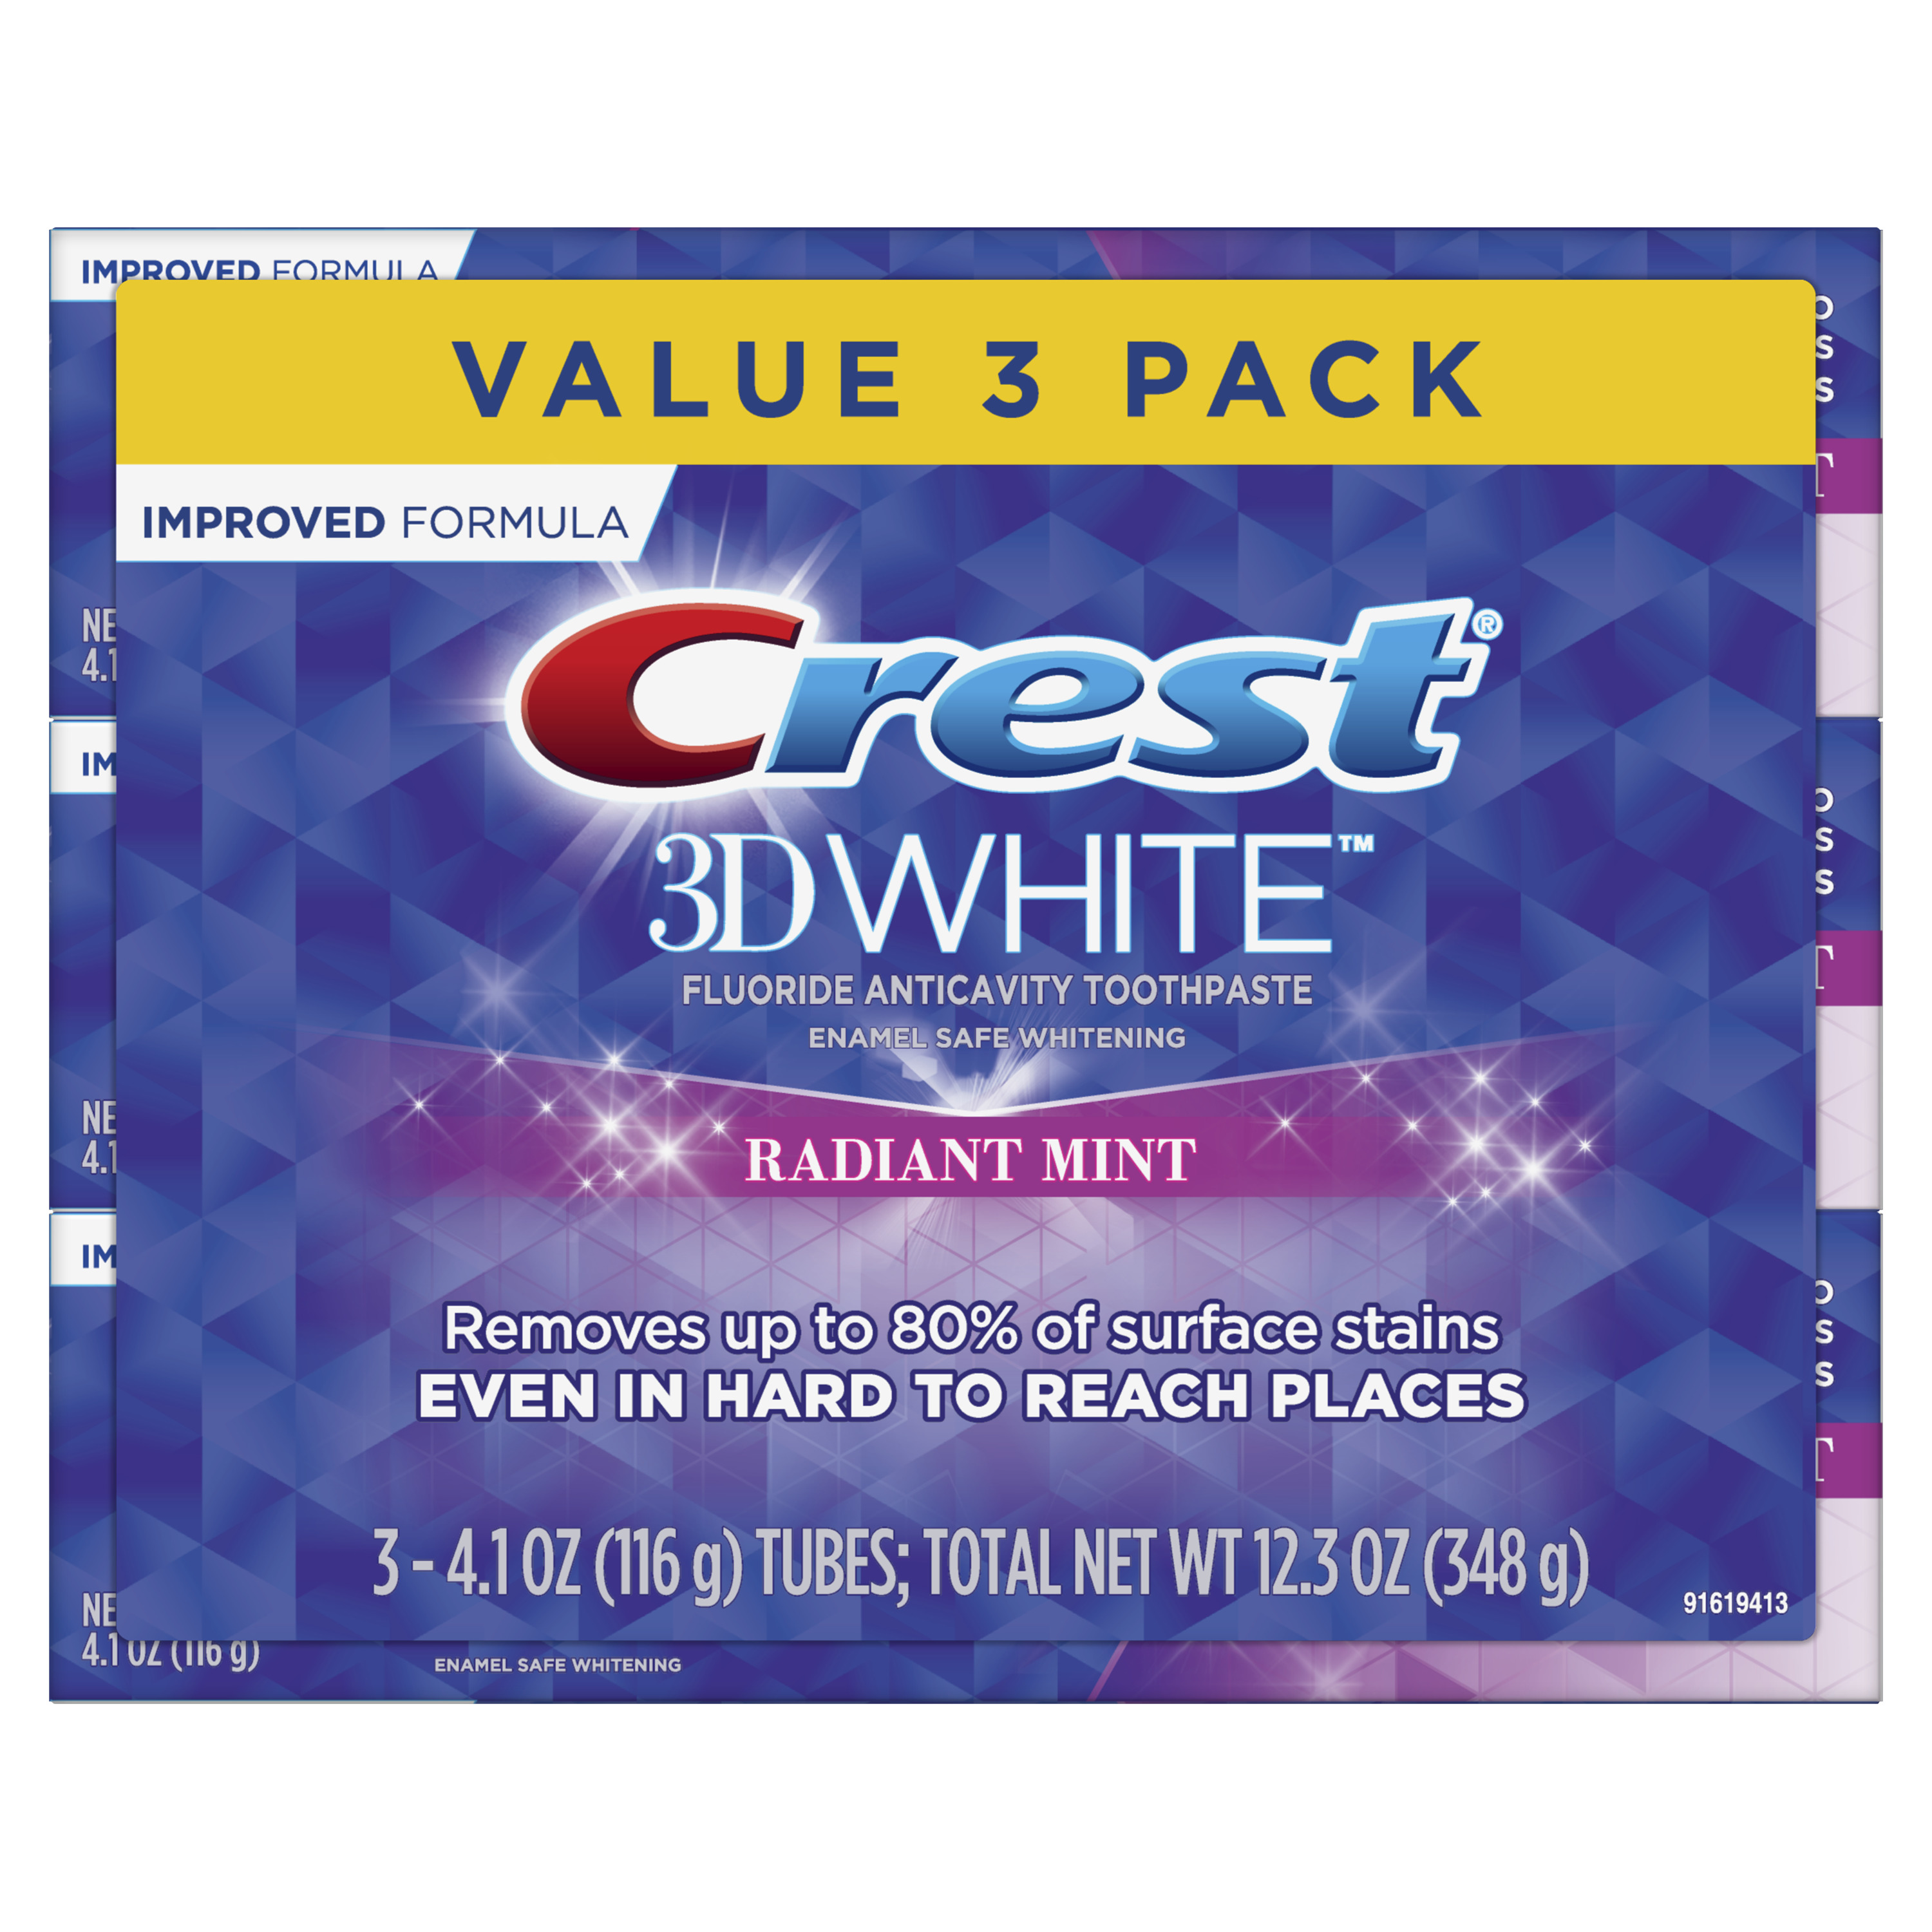 Crest 3D White Whitening Toothpaste, Radiant Mint, 4.1 oz, 3 Pack - image 1 of 8